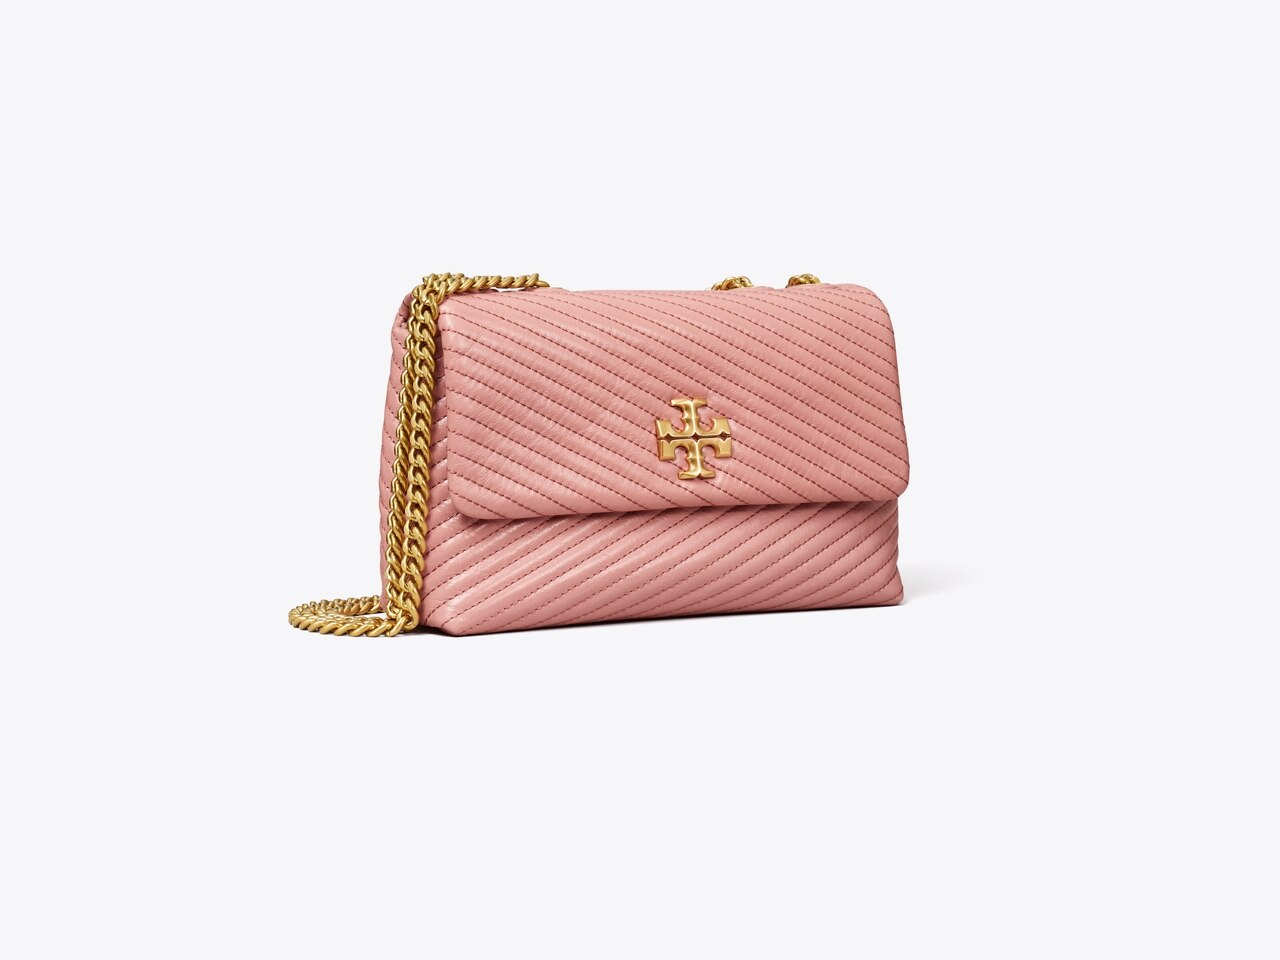 Quilted Chevron Design Chain Strap Flap Bag In DEEP PINK